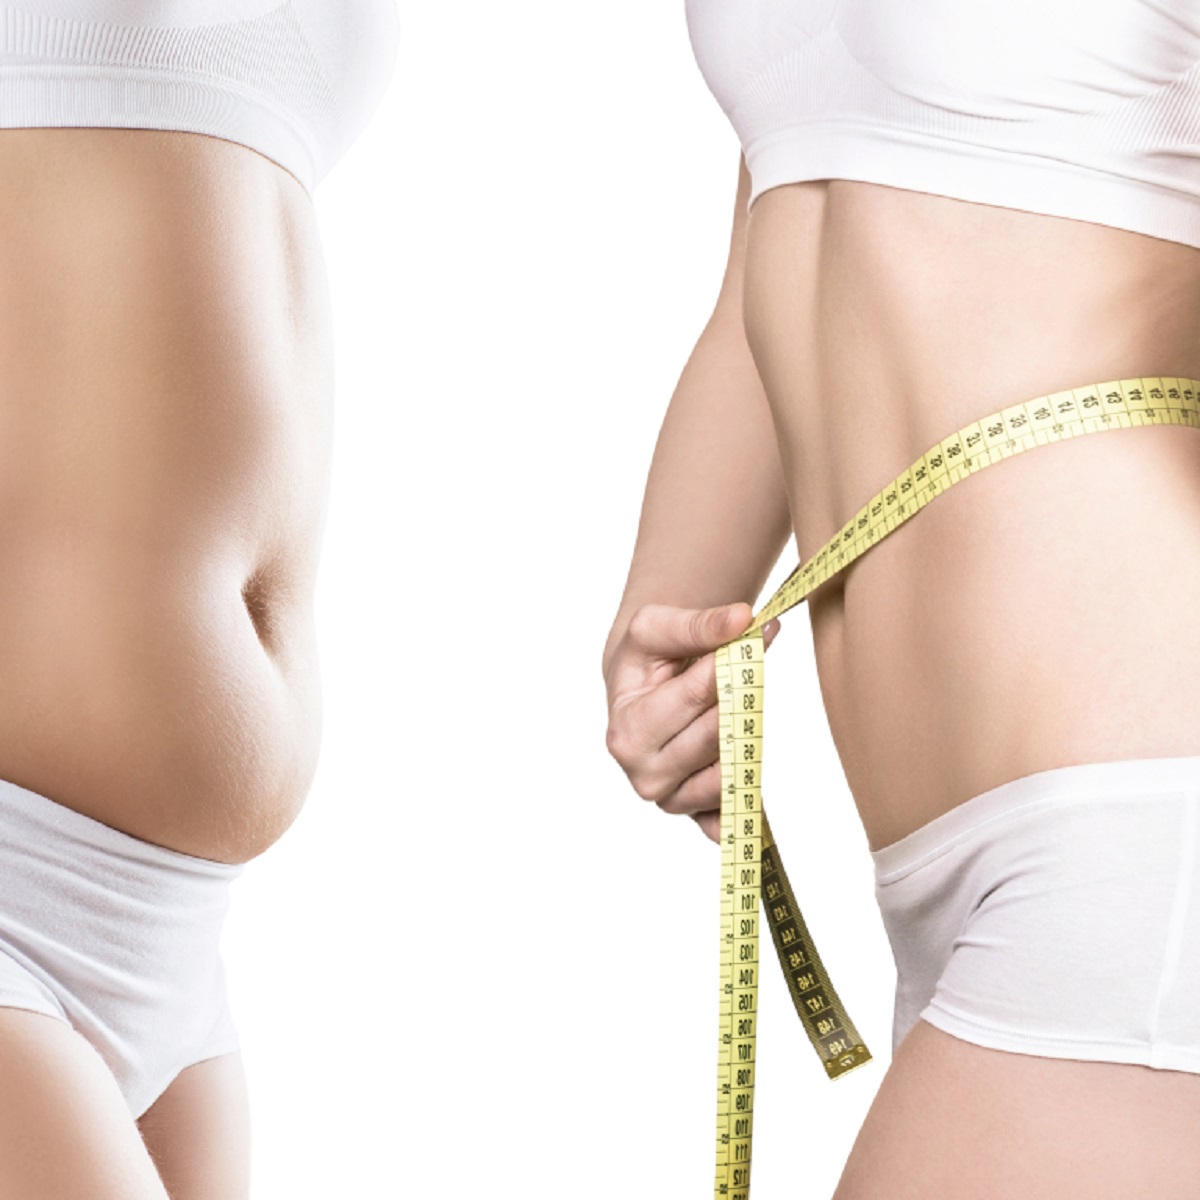 Read more about the article VISCERAL FAT – Why is Visceral Fat Dangerous to You and 12 Tips to Get Rid of It Naturally